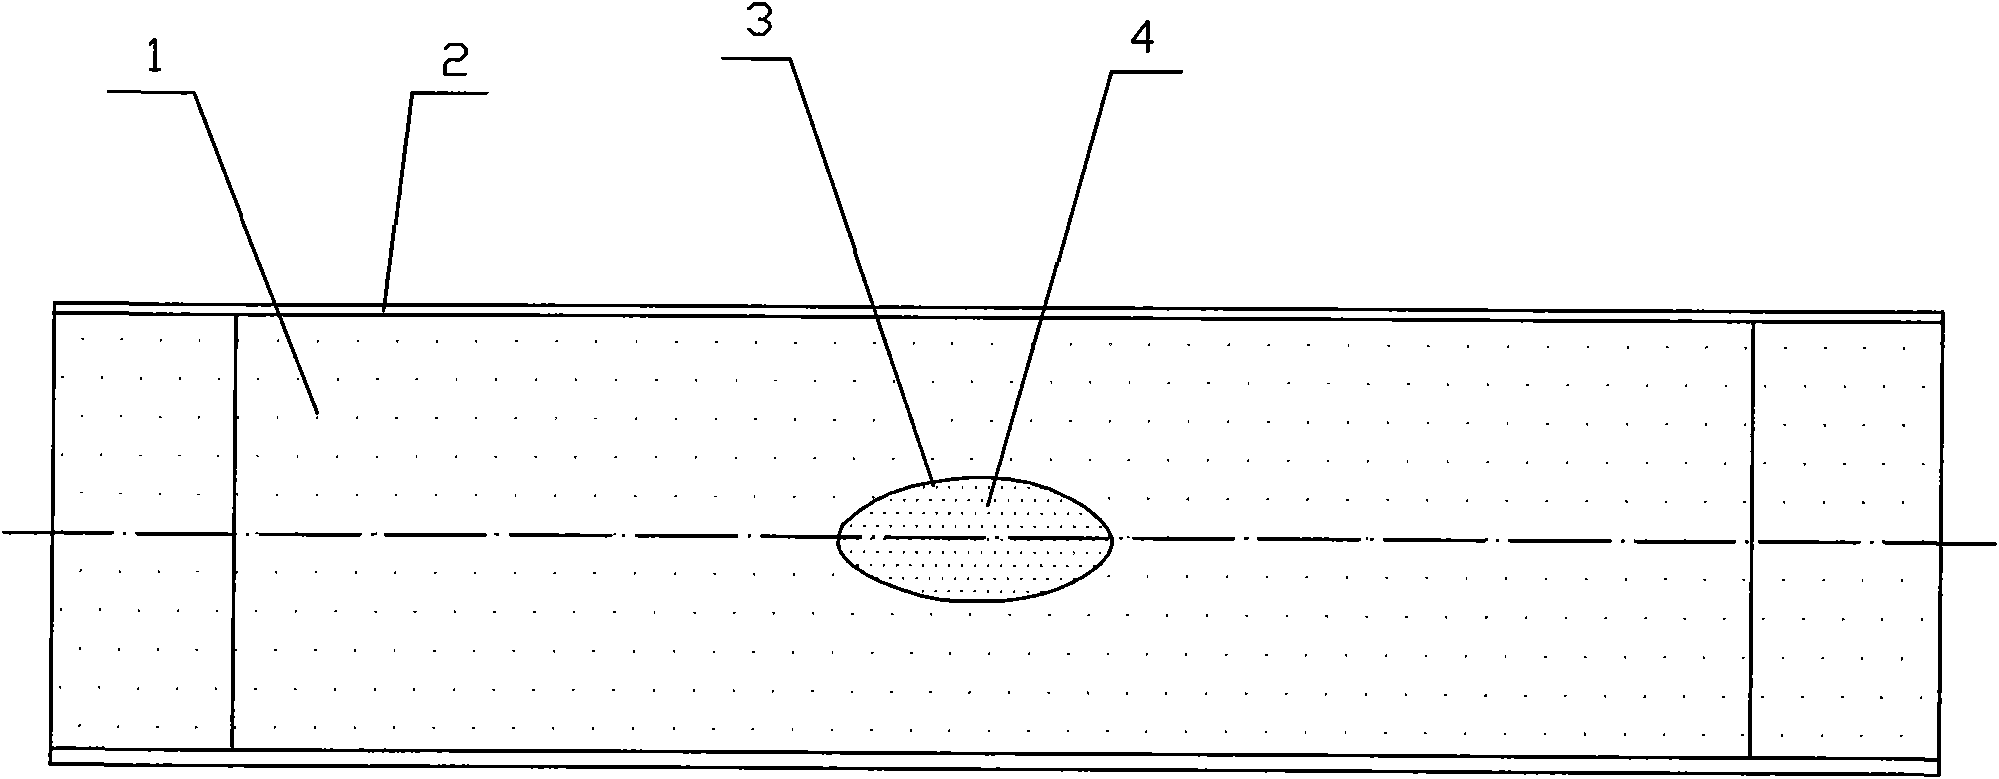 Central buried olive-shaped interception nozzle rod